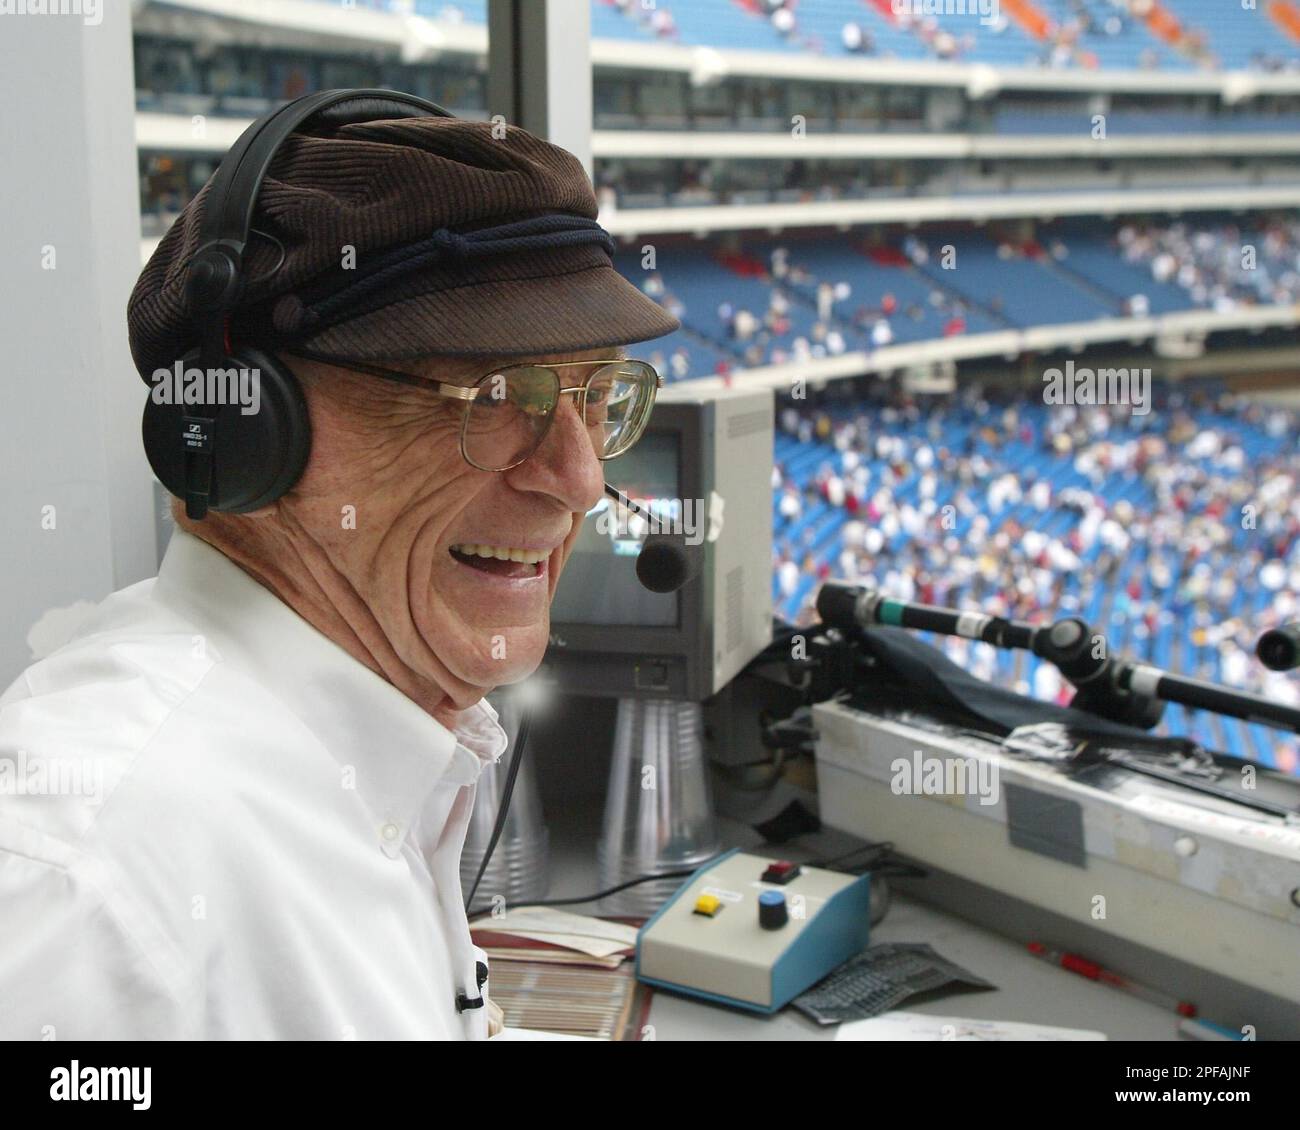 Detroit Tigers radio announcer Ernie Harwell smiles after finishing the final broadcast of his 55-year career as the Toronto Blue Jays defeated the Tigers 1-0 in AL action in Toronto on Sunday